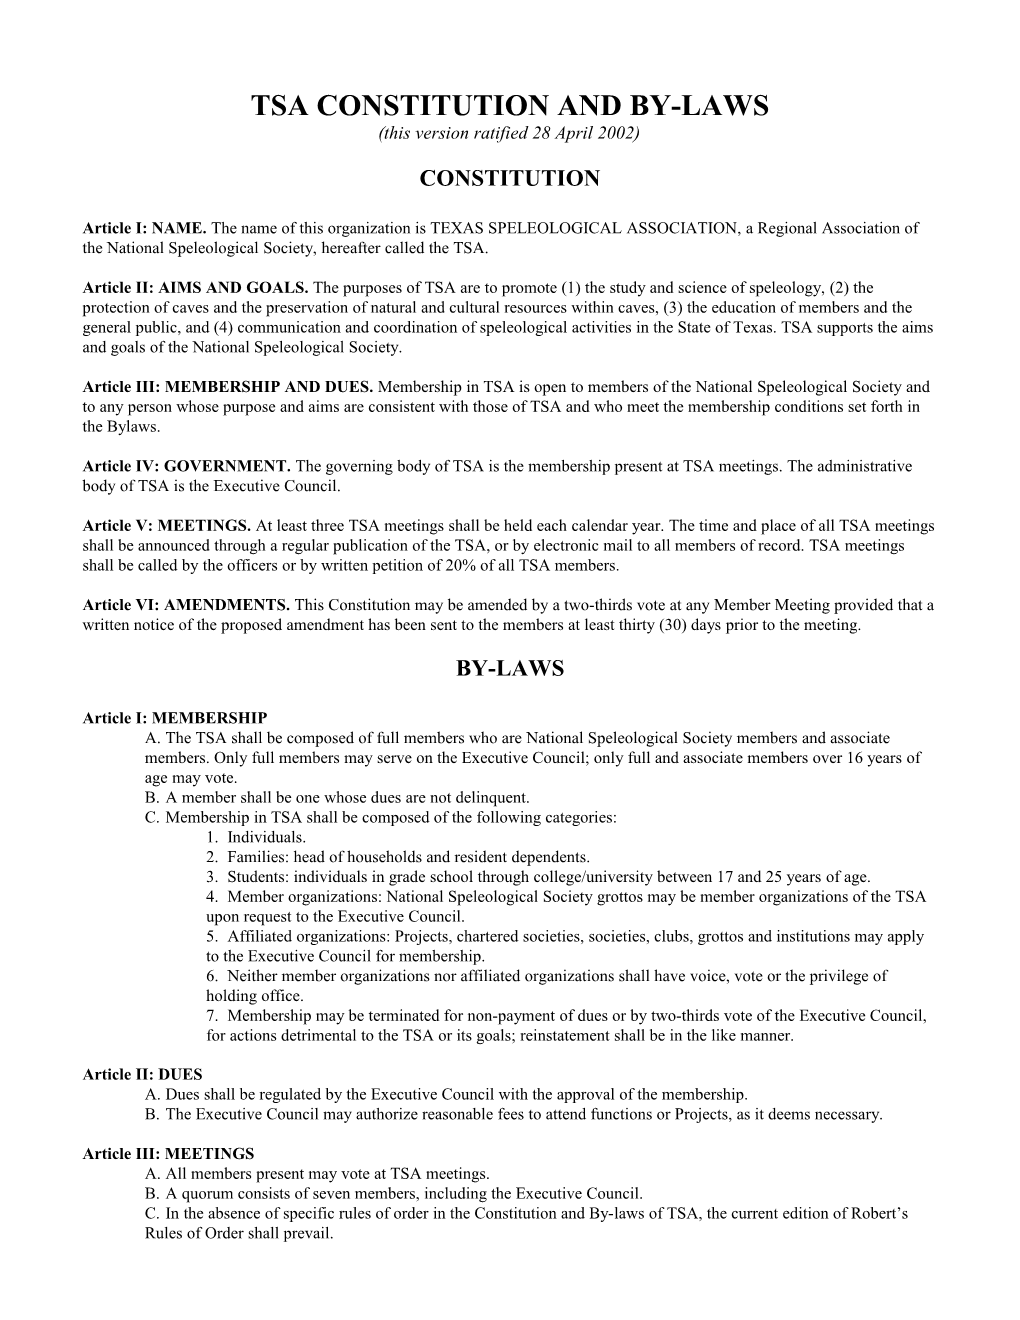 Tsa Constitution and By-Laws